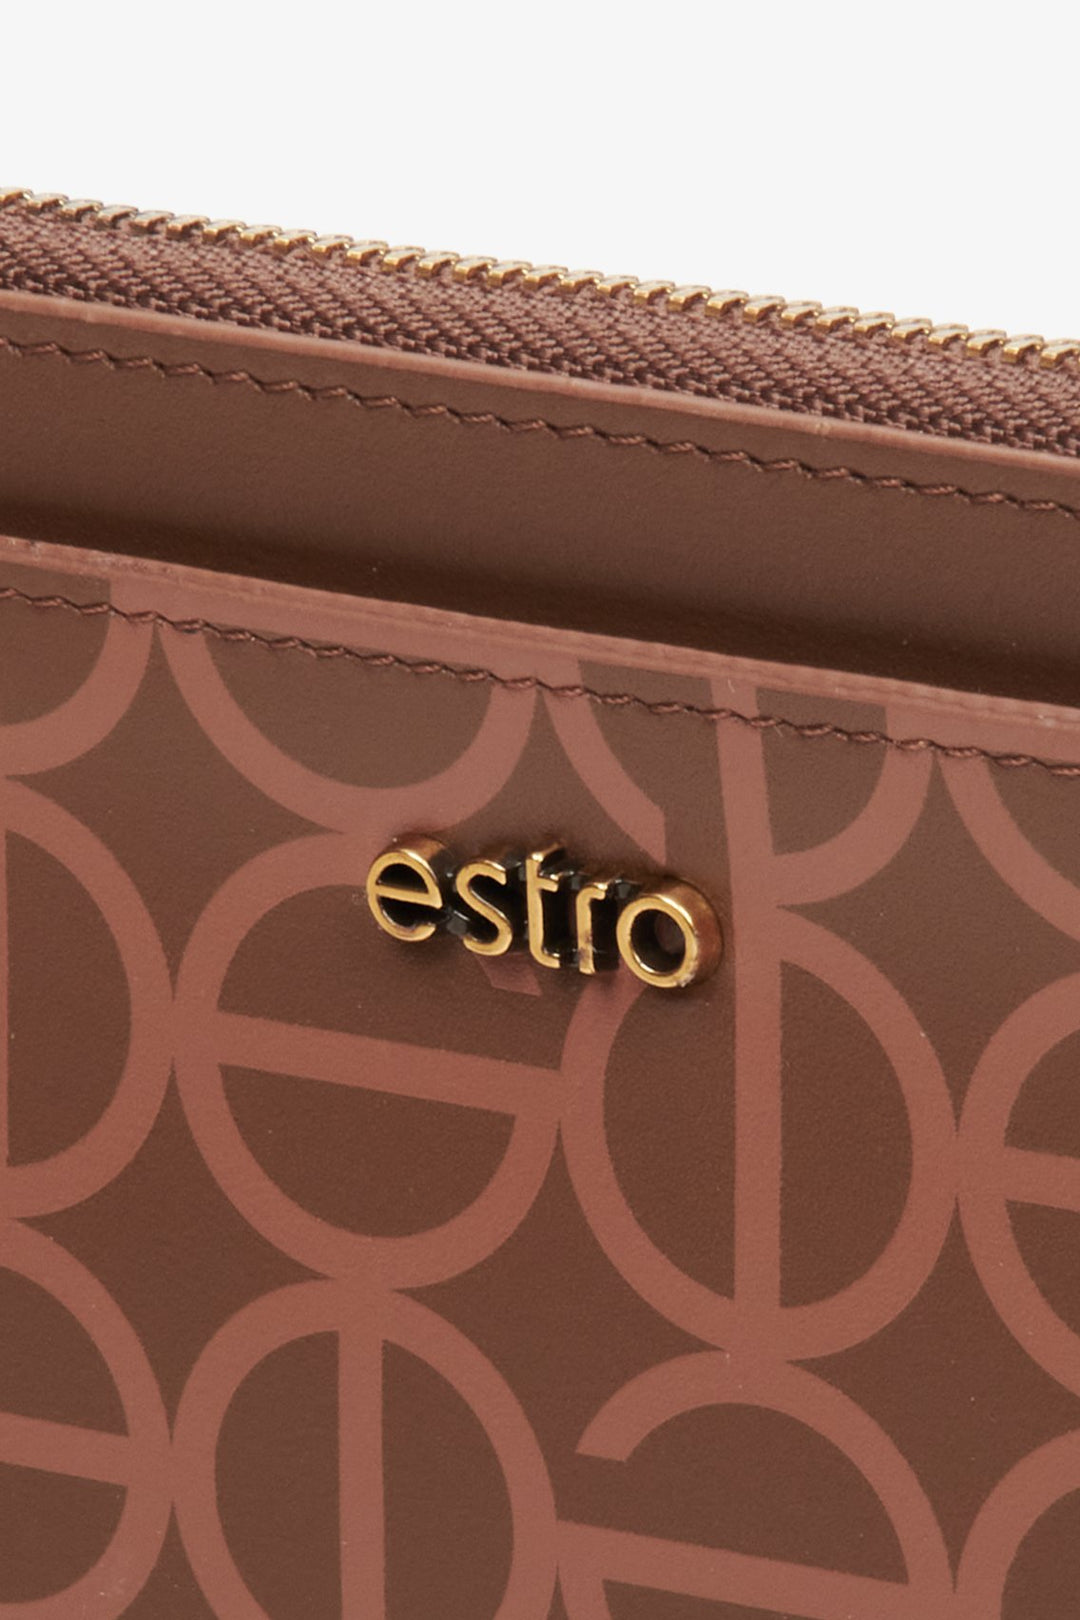 Women's, large brown wristlet made of genuine leather by Estro - close-up on the details.